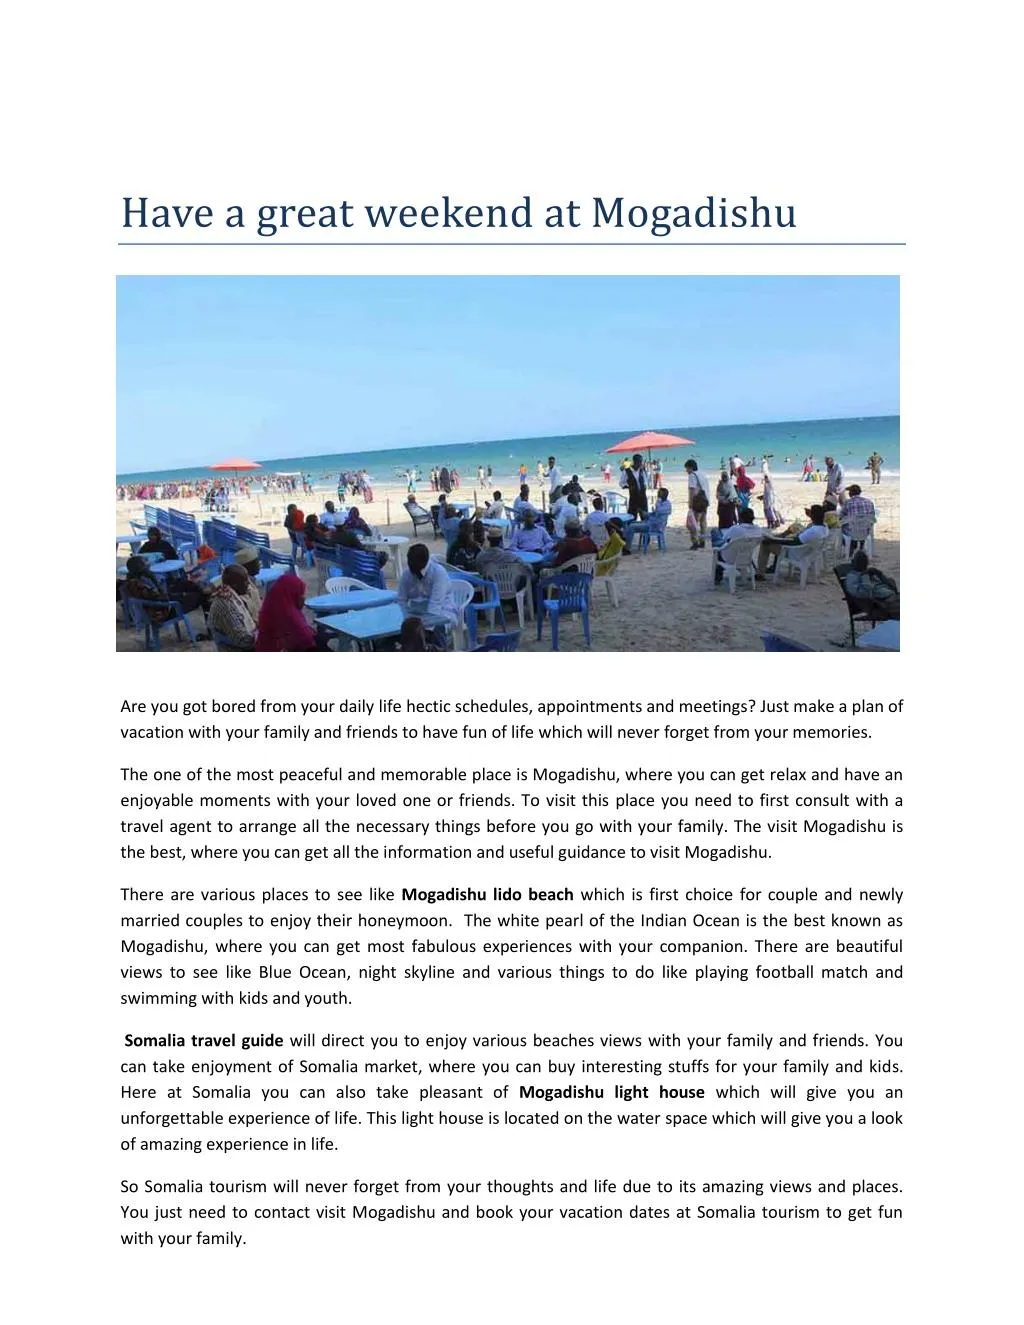 have a great weekend at mogadishu